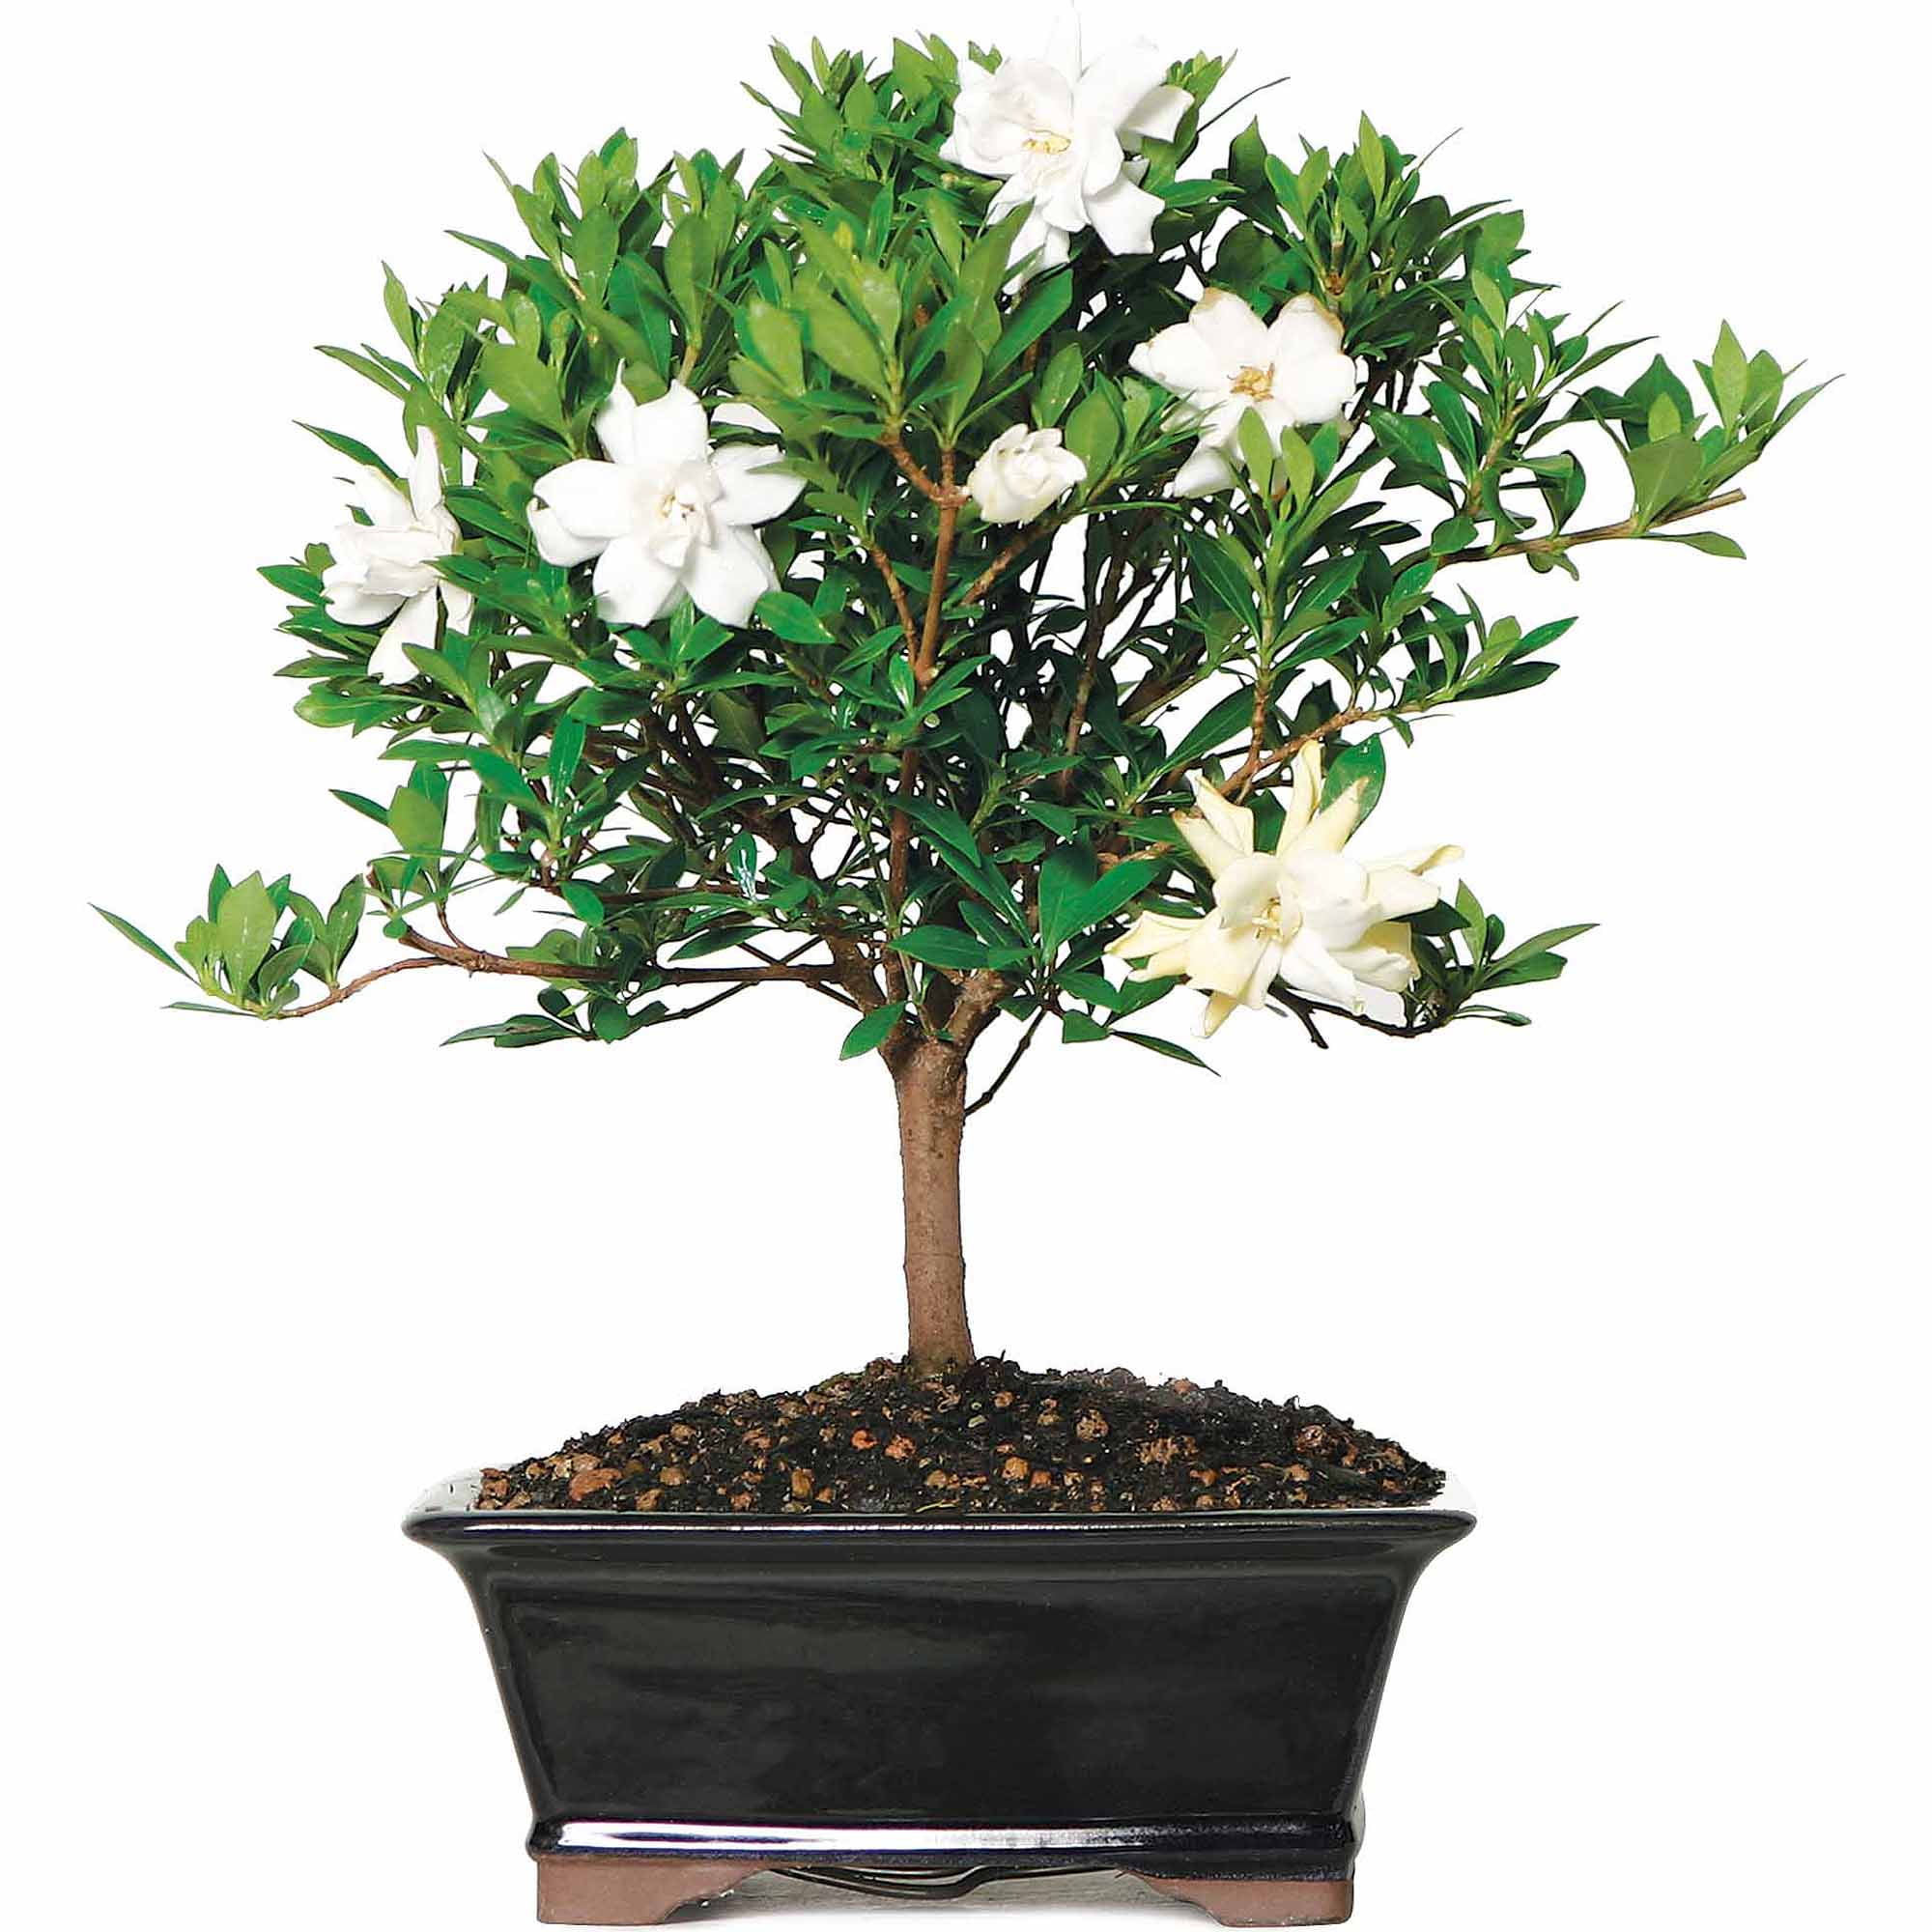 4 Years Old; 6 to 8 Tall with Decorative Container Not Sold in Arizona Brussels Live Gardenia Outdoor Bonsai Tree